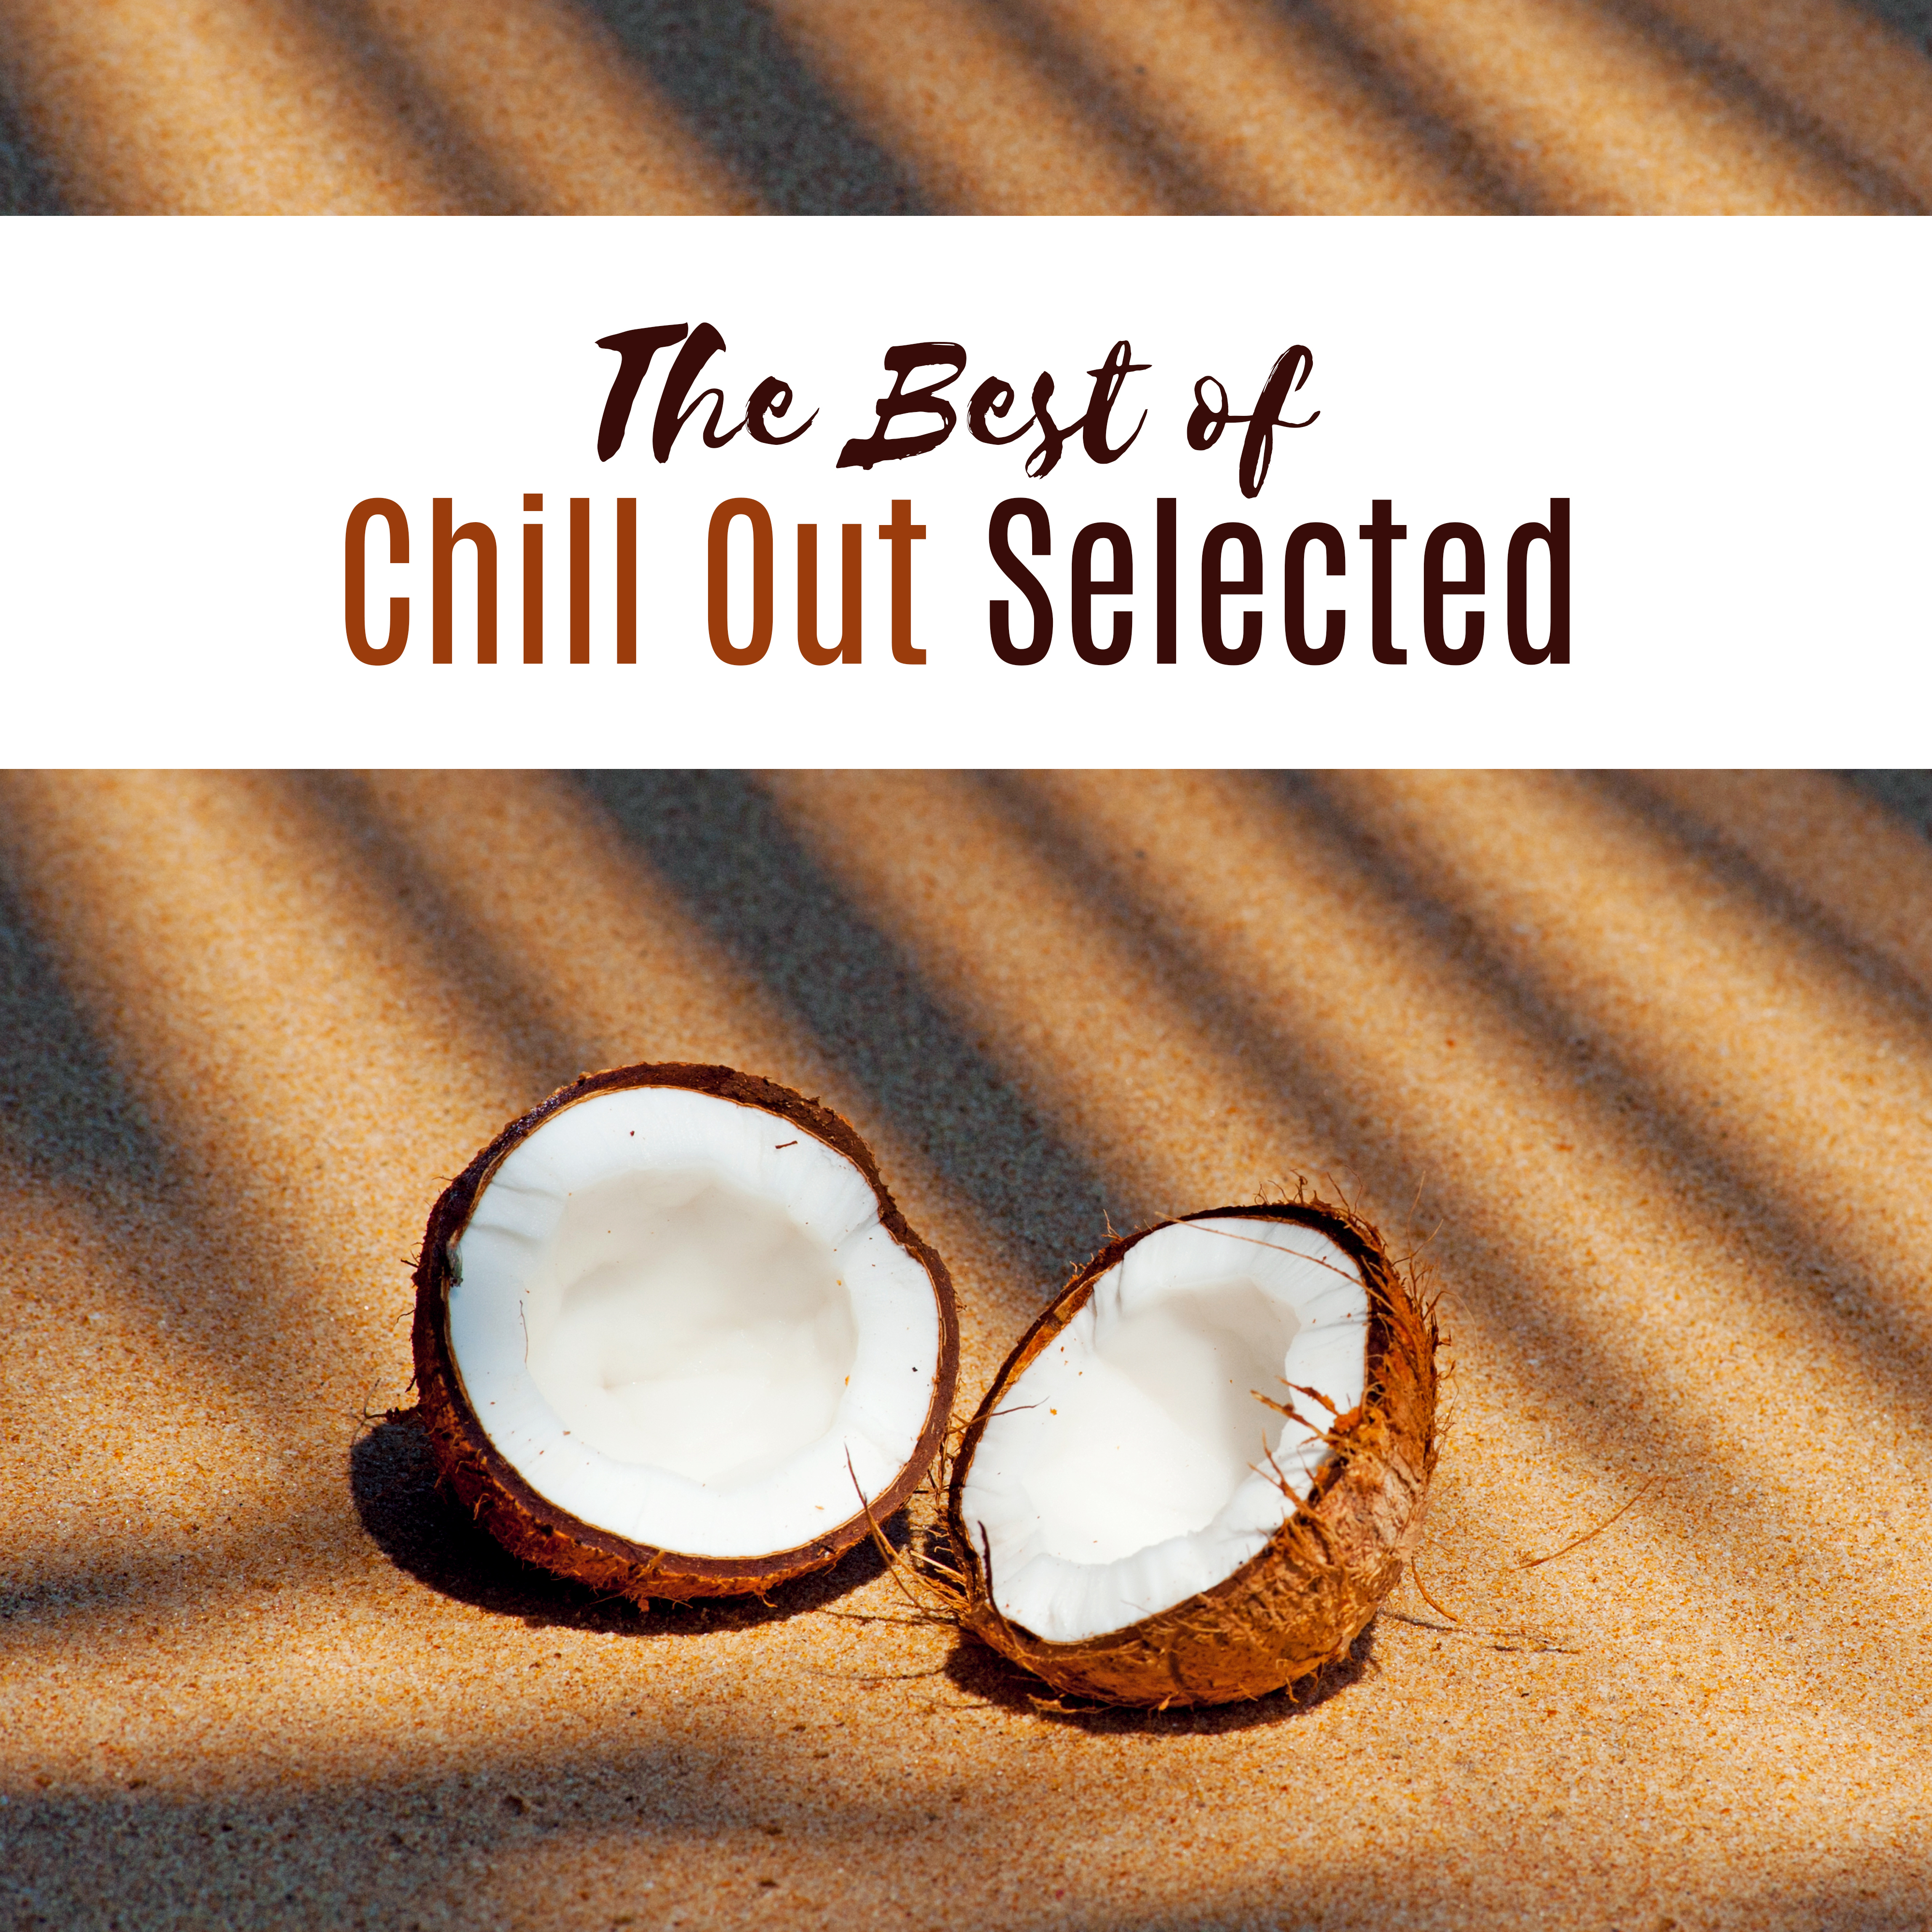 The Best of Chill Out Selected  Fresh Chill Out Hits, Summer Music, Party Dance, Relax